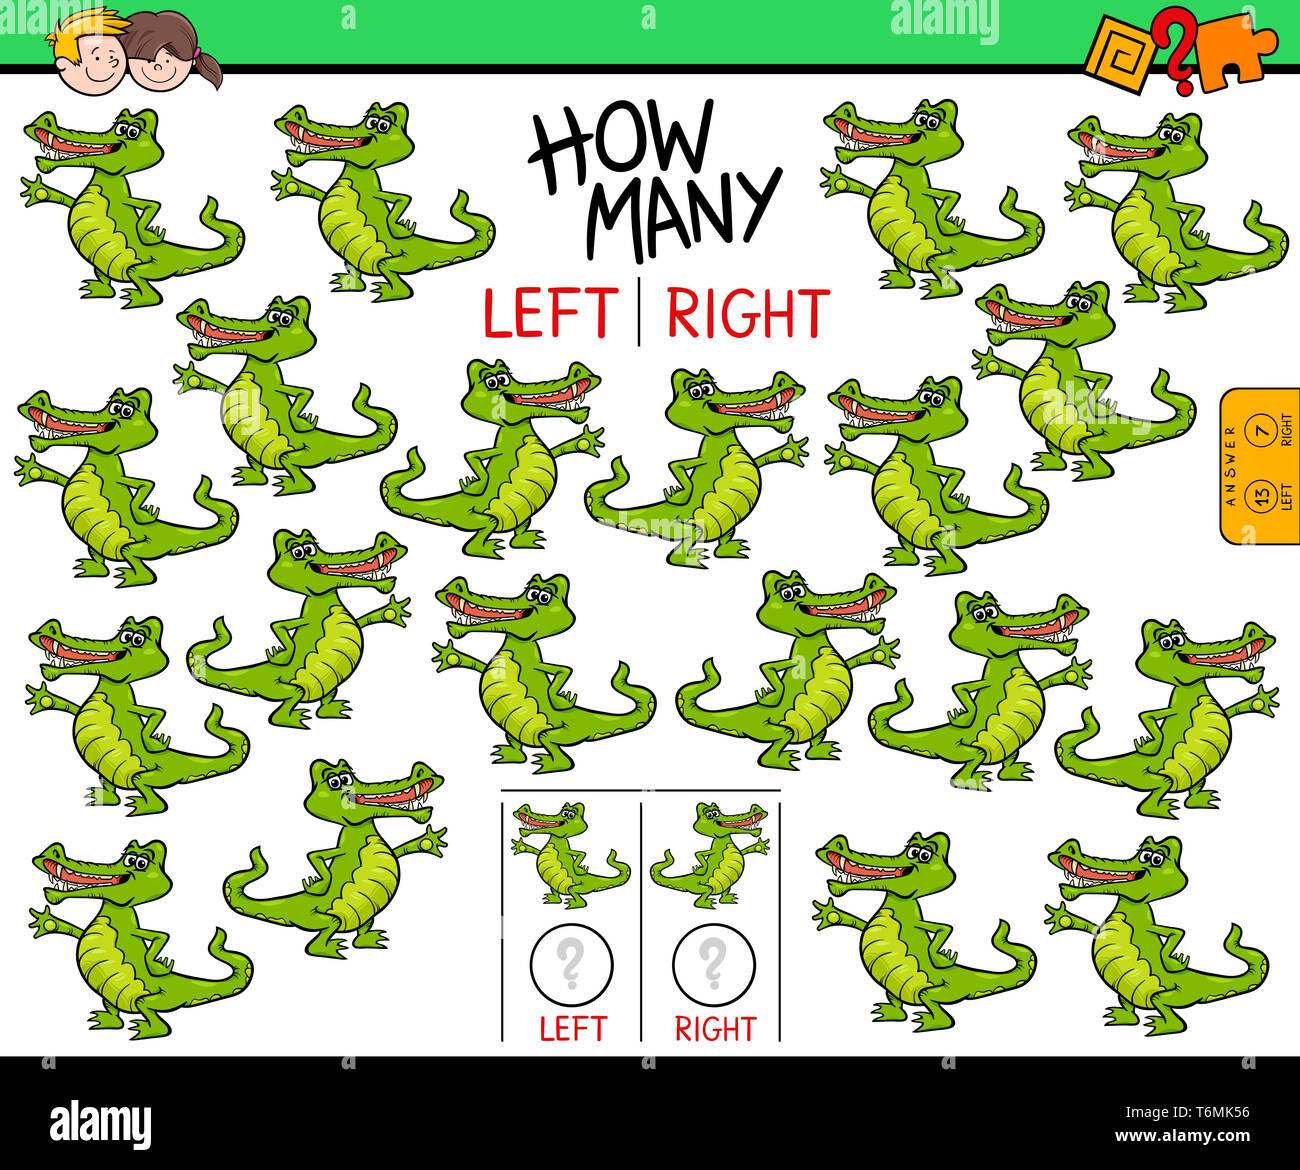 counting left and right pictures of crocodile Stock Photo